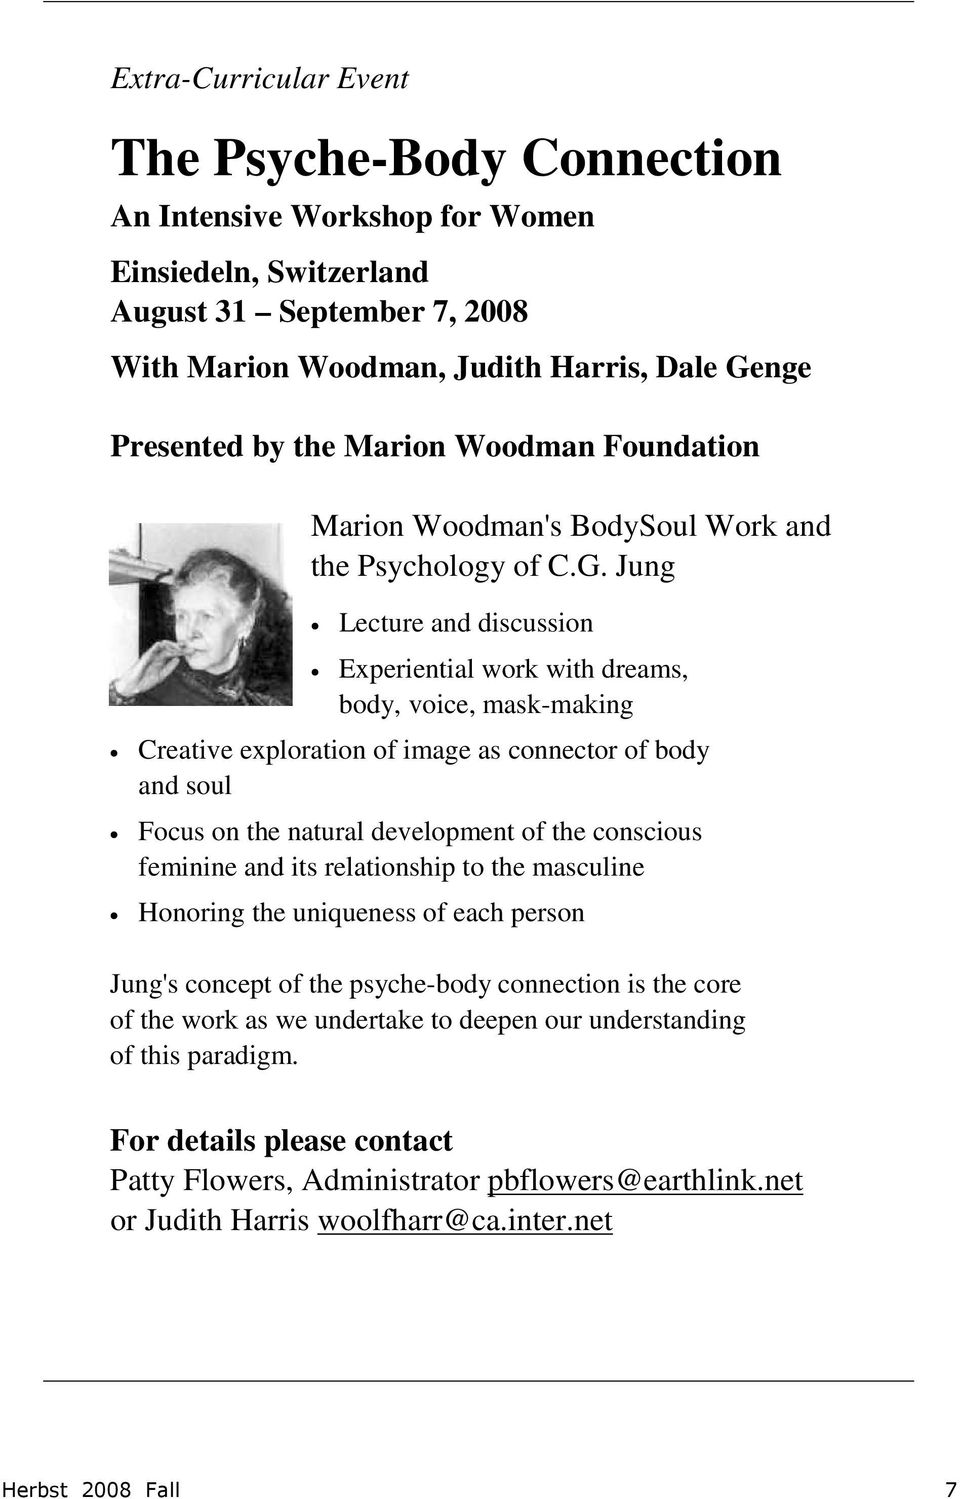 Jung Lecture and discussion Experiential work with dreams, body, voice, mask-making Creative exploration of image as connector of body and soul Focus on the natural development of the conscious